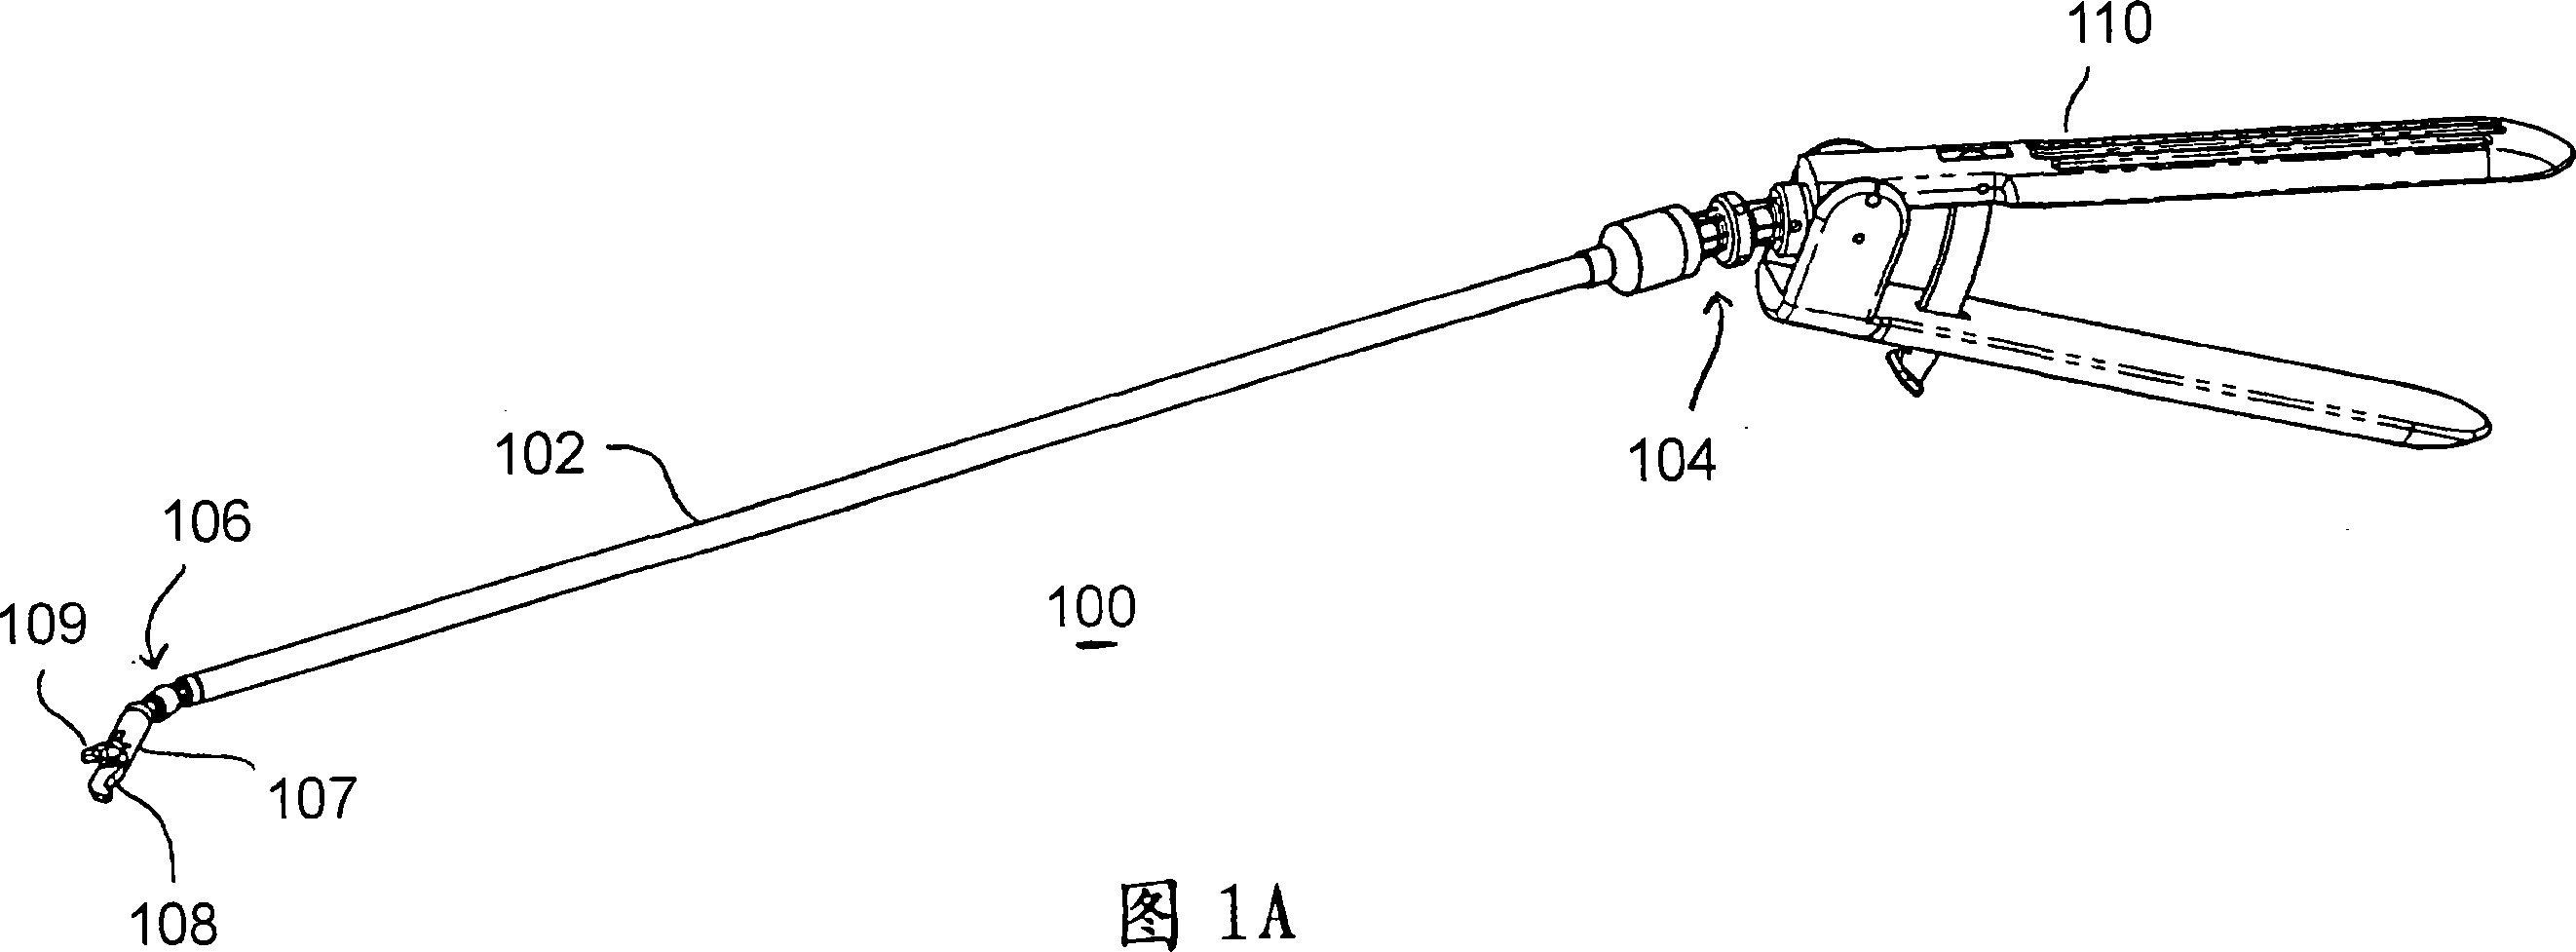 Link systems and articulation mechanisms for remote manipulation of surgical or diagnostic tools